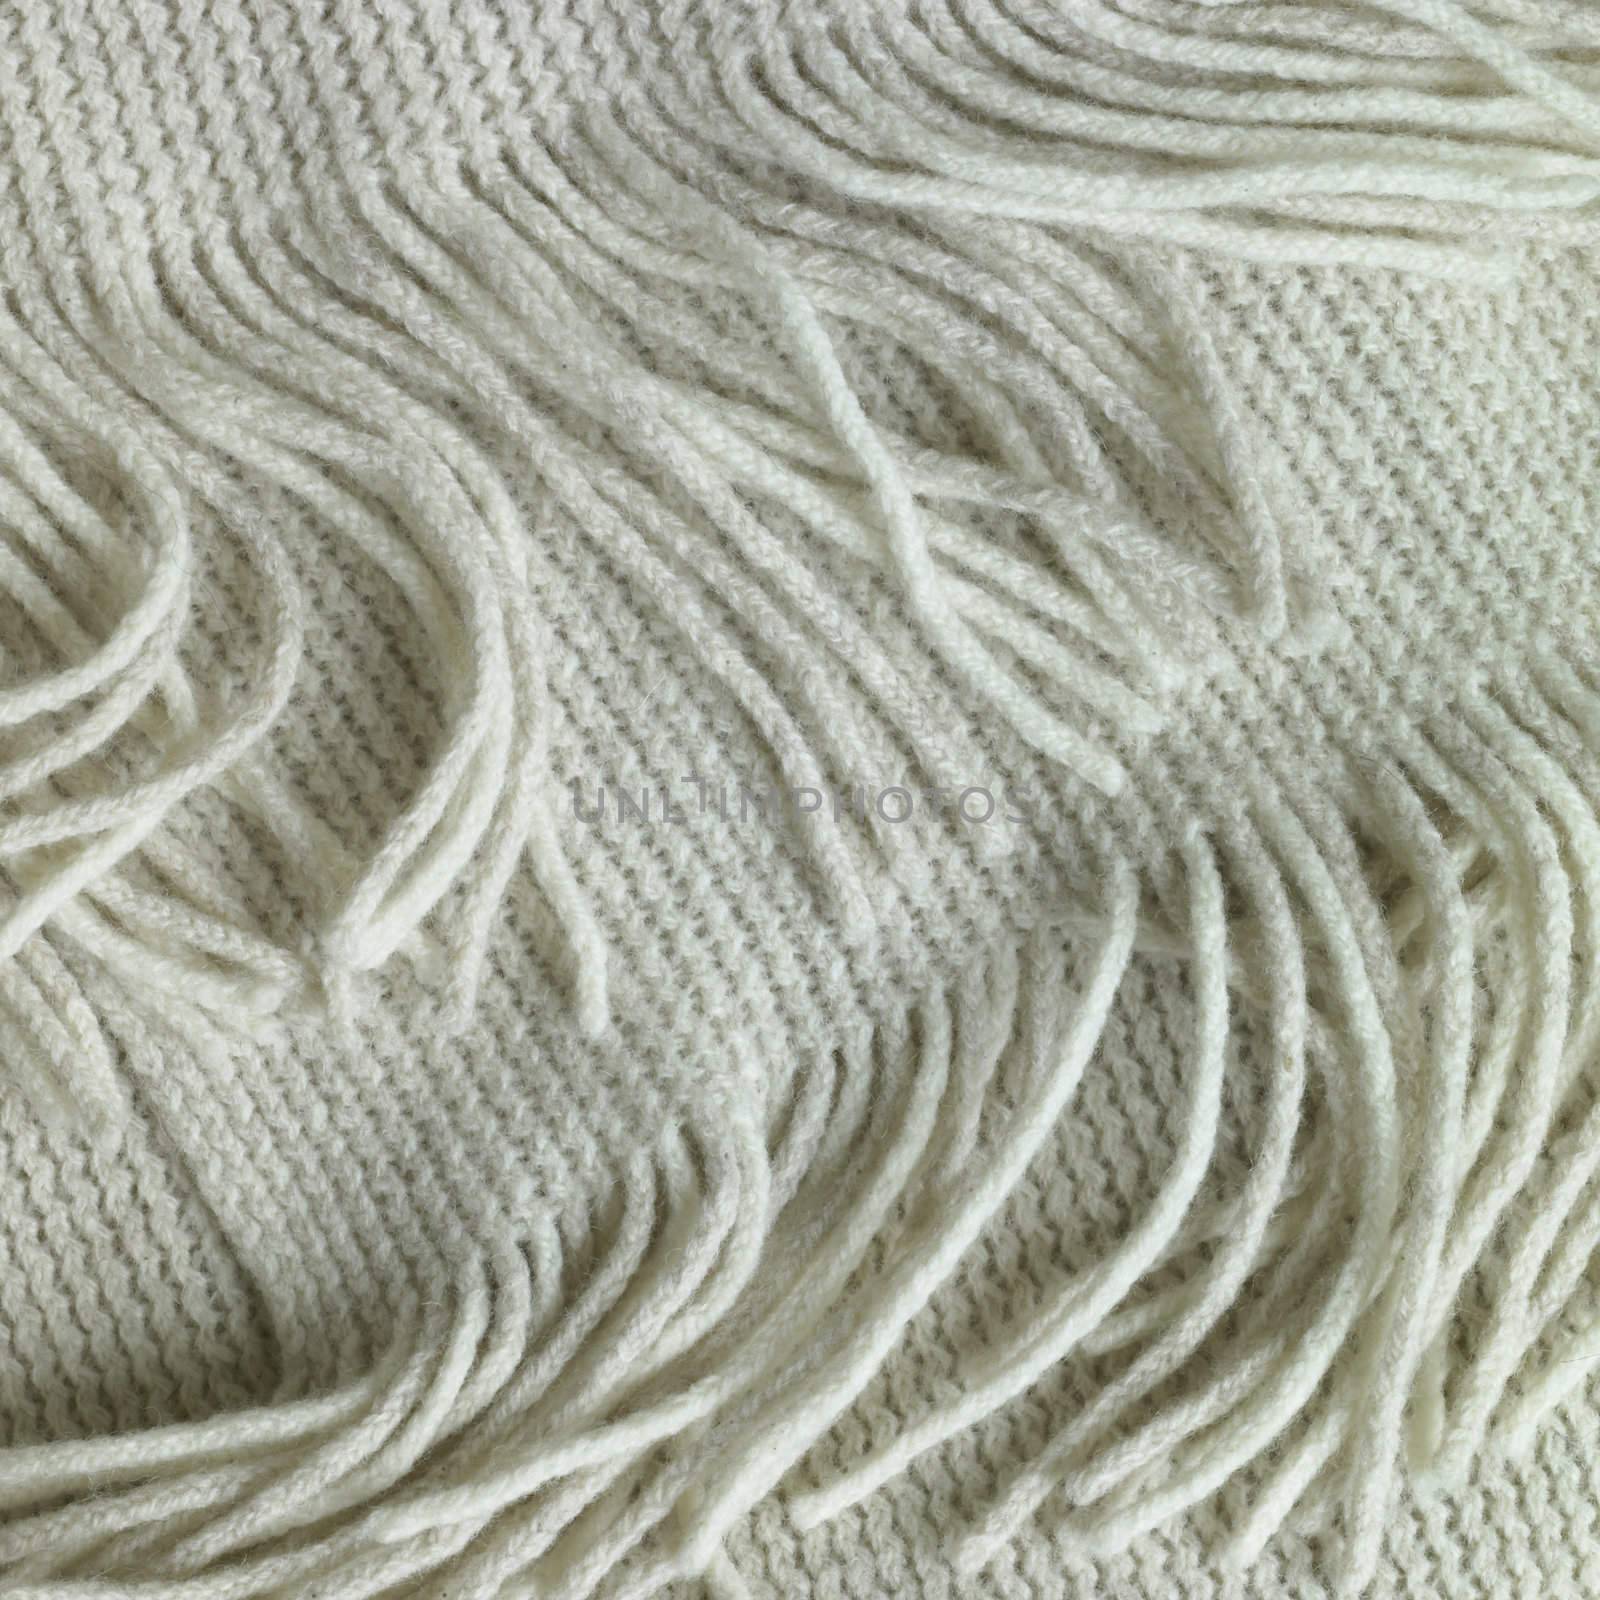 scarf close-up by mmm